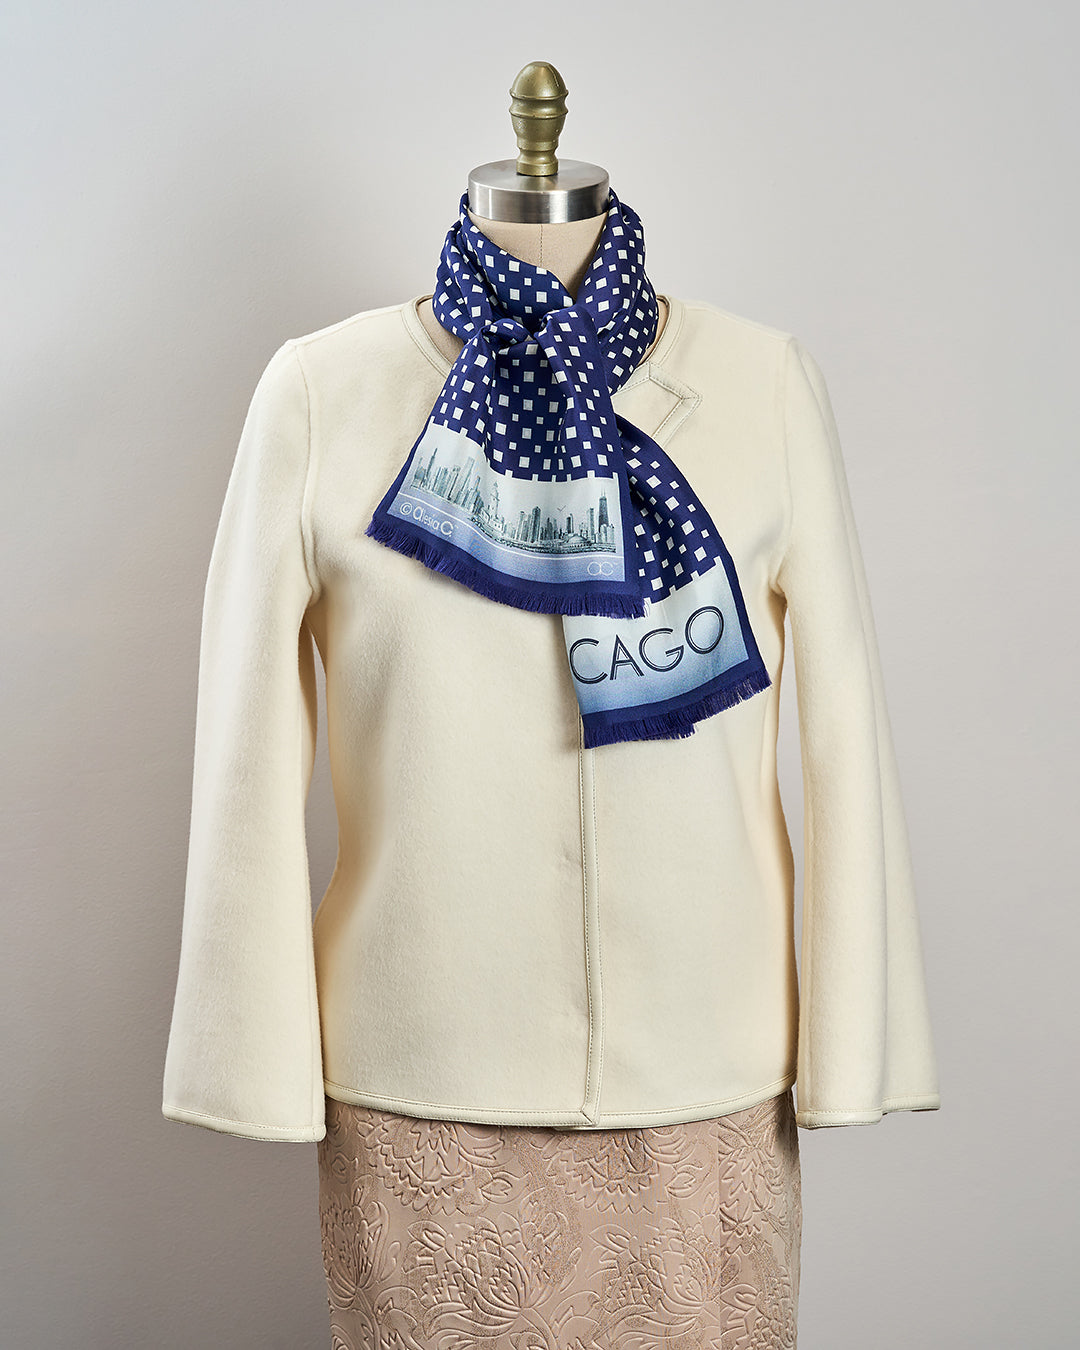 CHICAGO Skyline Art Pure Double Silk Scarf Navy Blue White Square Pattern by Alesia Chaika